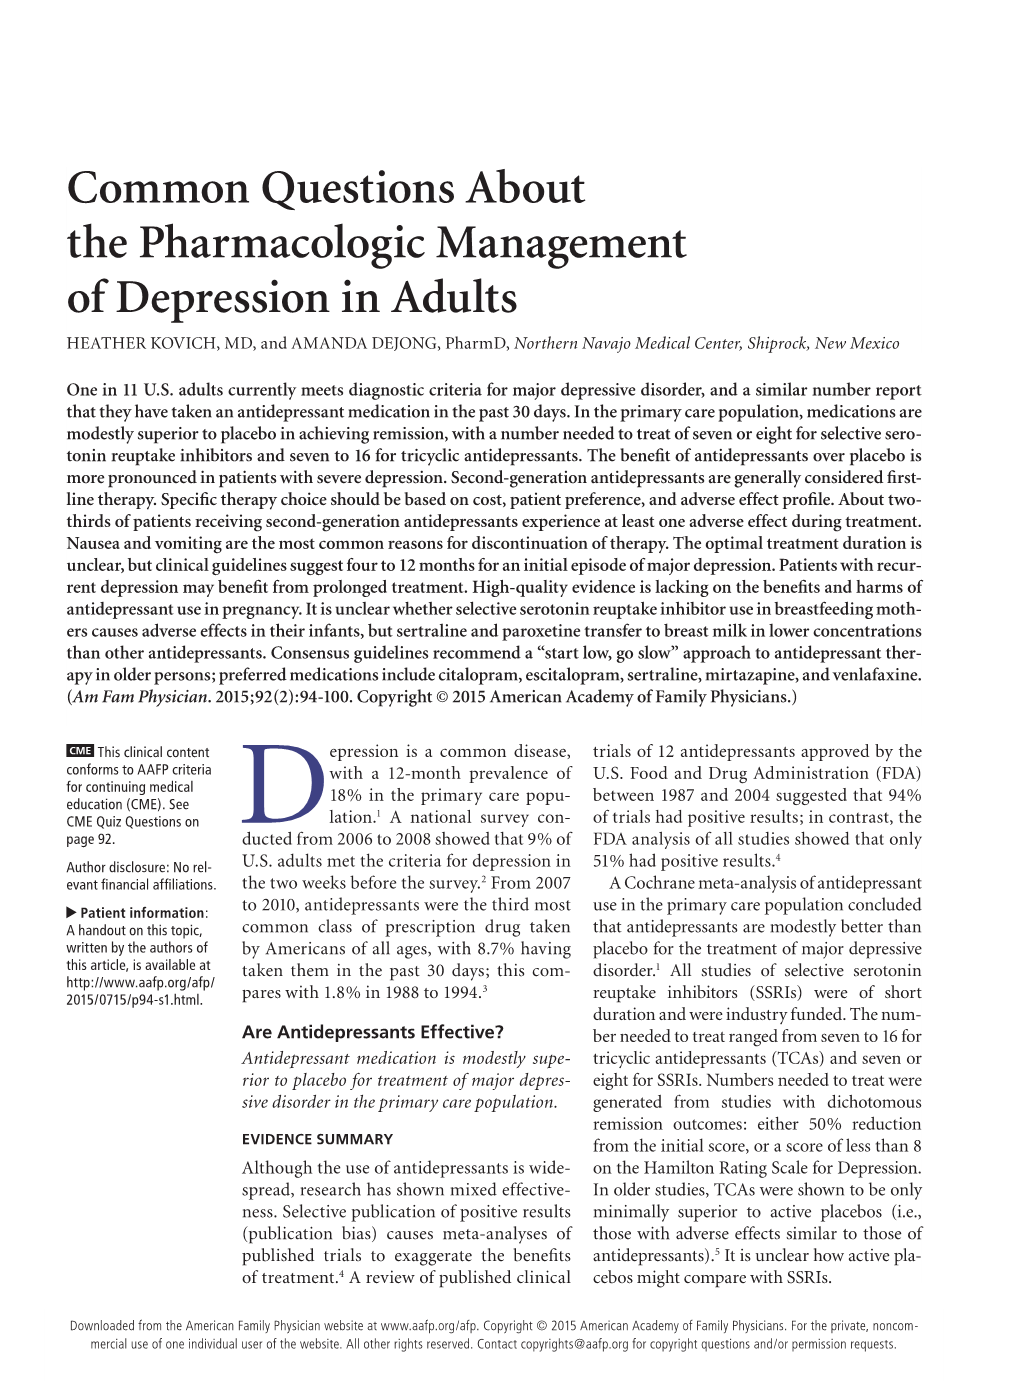 Common Questions About the Pharmacologic Management Of